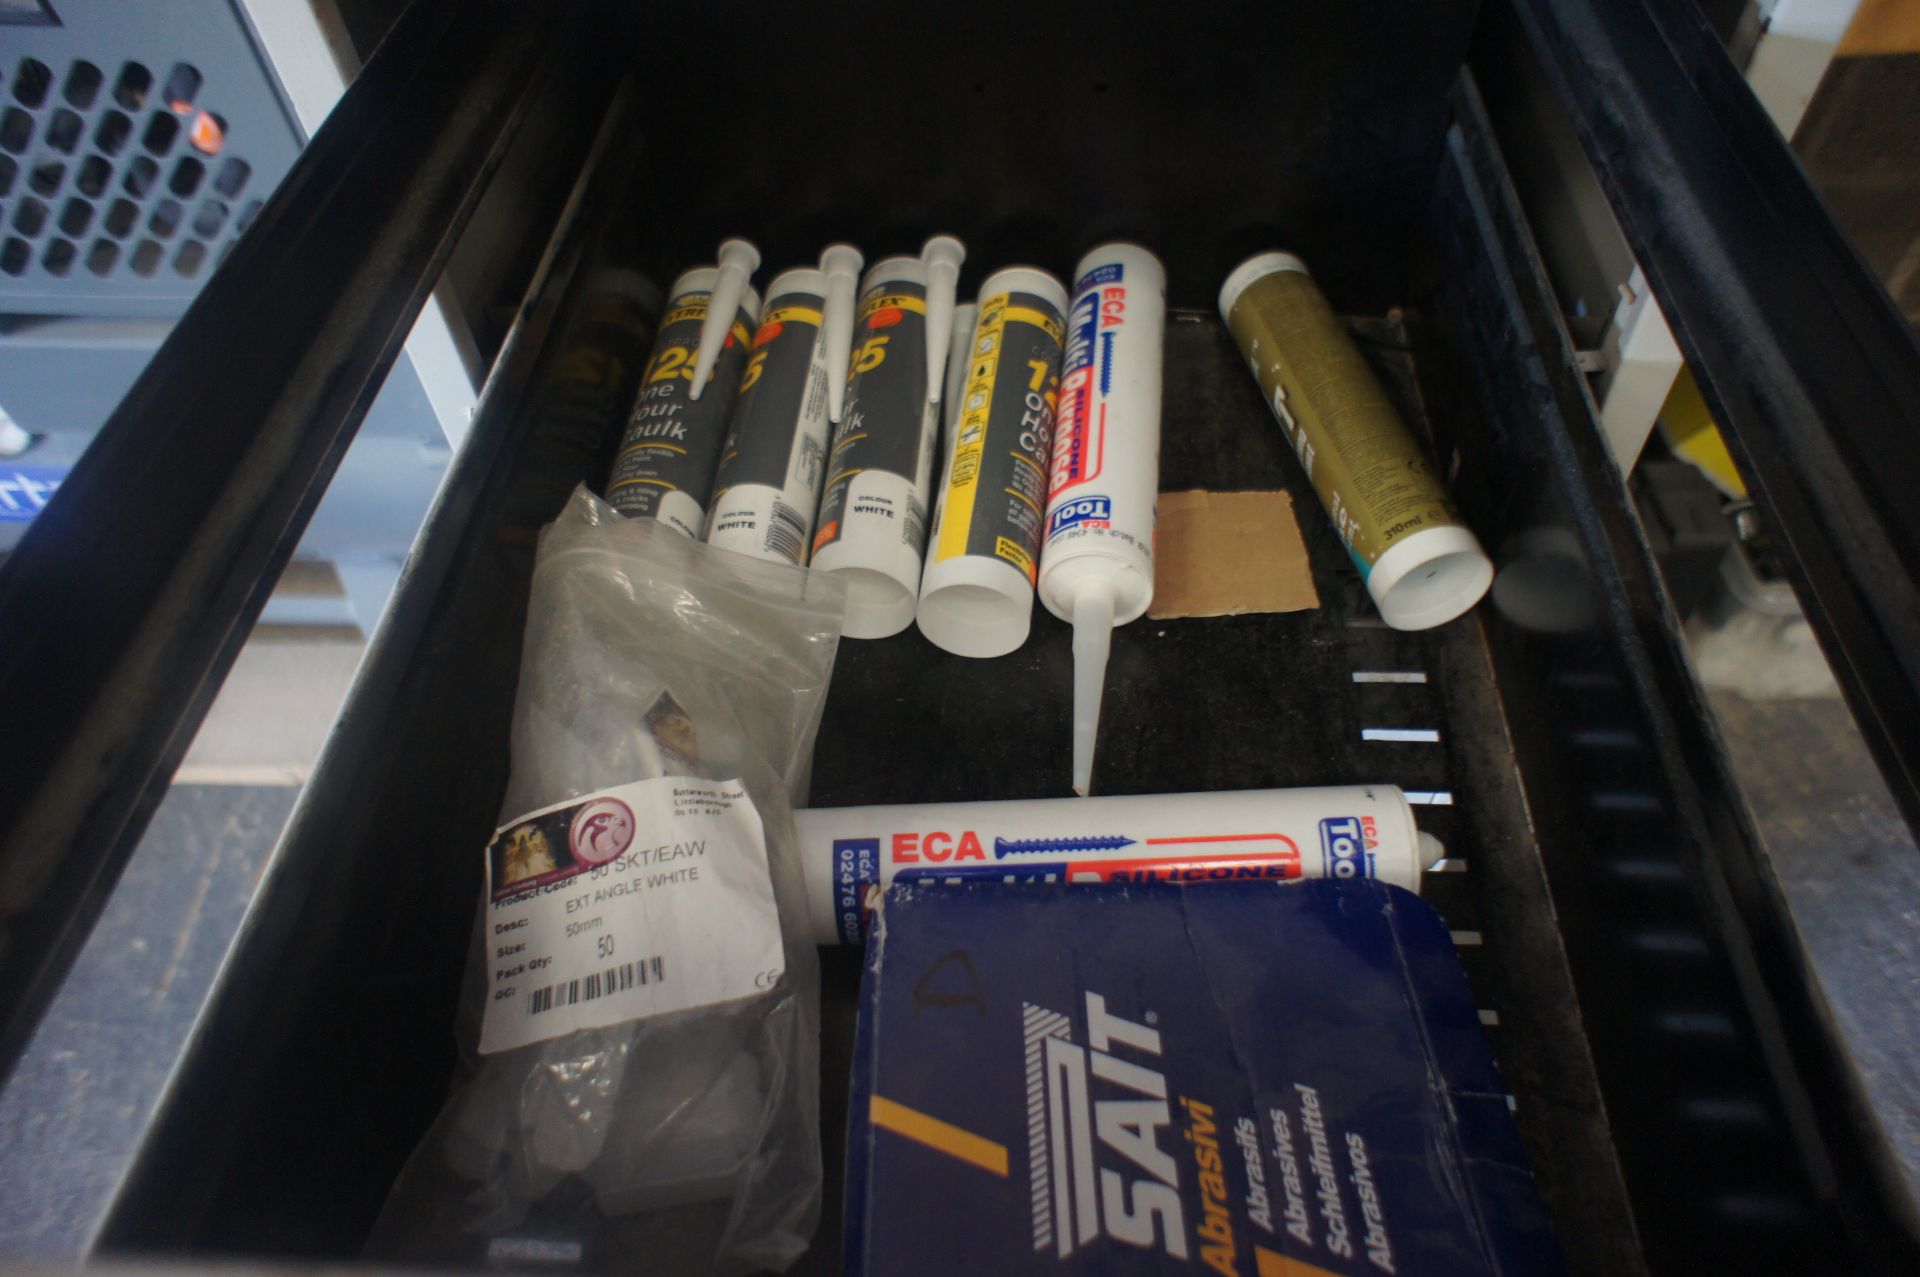 4 Drawer Metal Filing Cabinet & Contents - Image 2 of 5